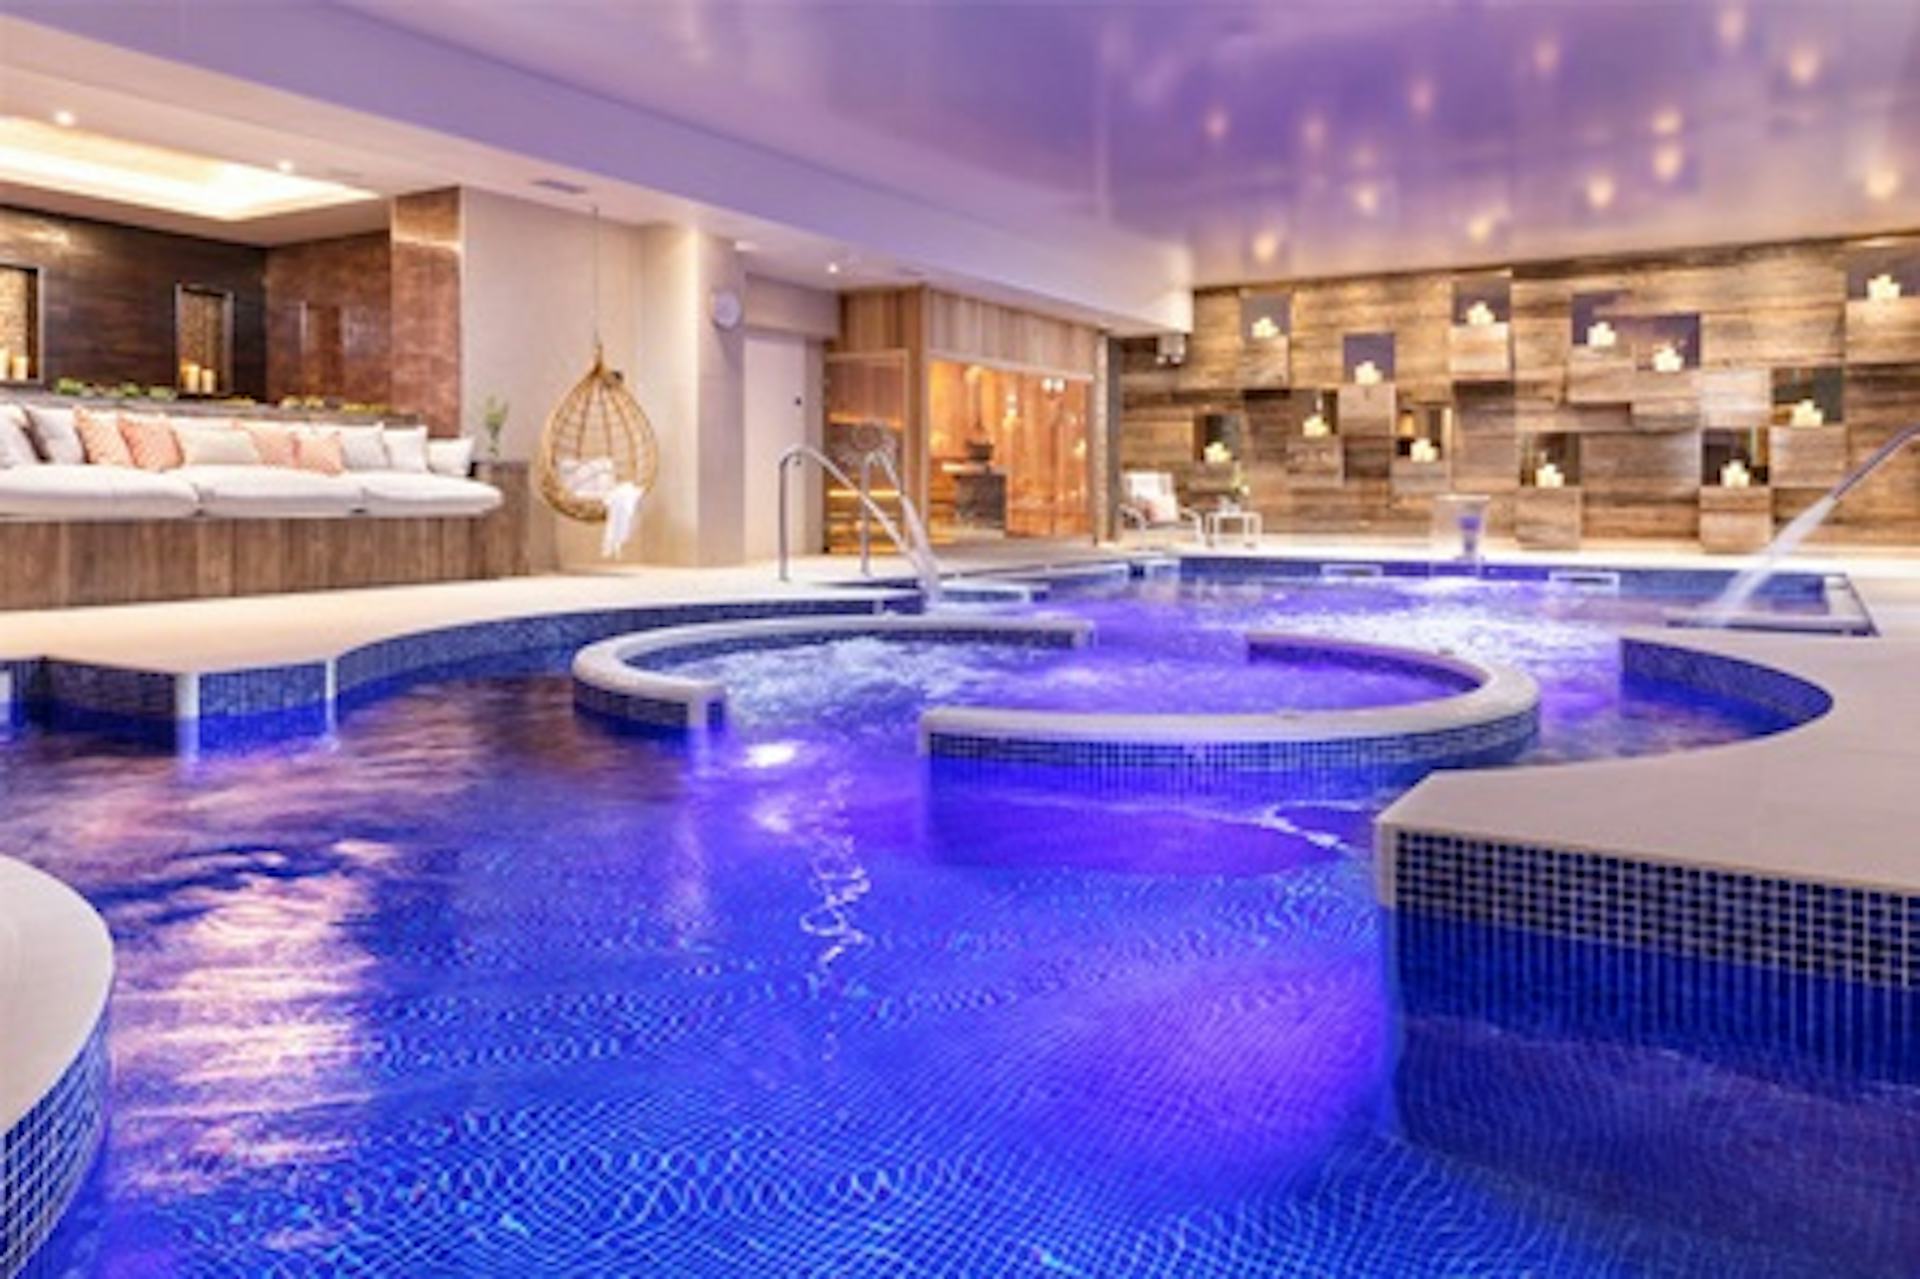 Elemis Pamper Spa Treat with Treatment, Lunch and Fizz for Two at the Luxury 4* St Michaels Resort, Falmouth